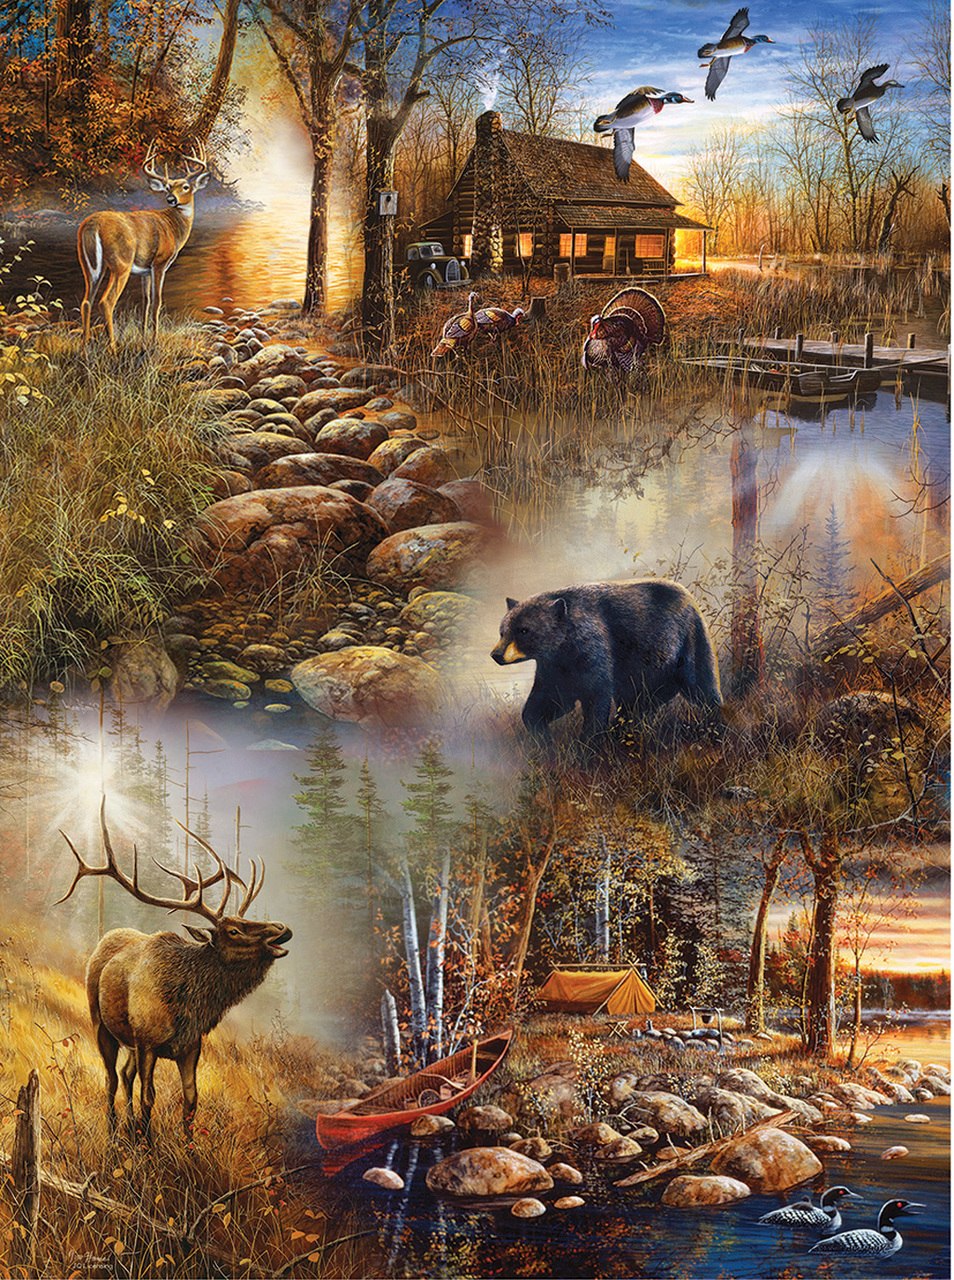 Forest Collage - 1000pc Jigsaw Puzzle by SunsOut